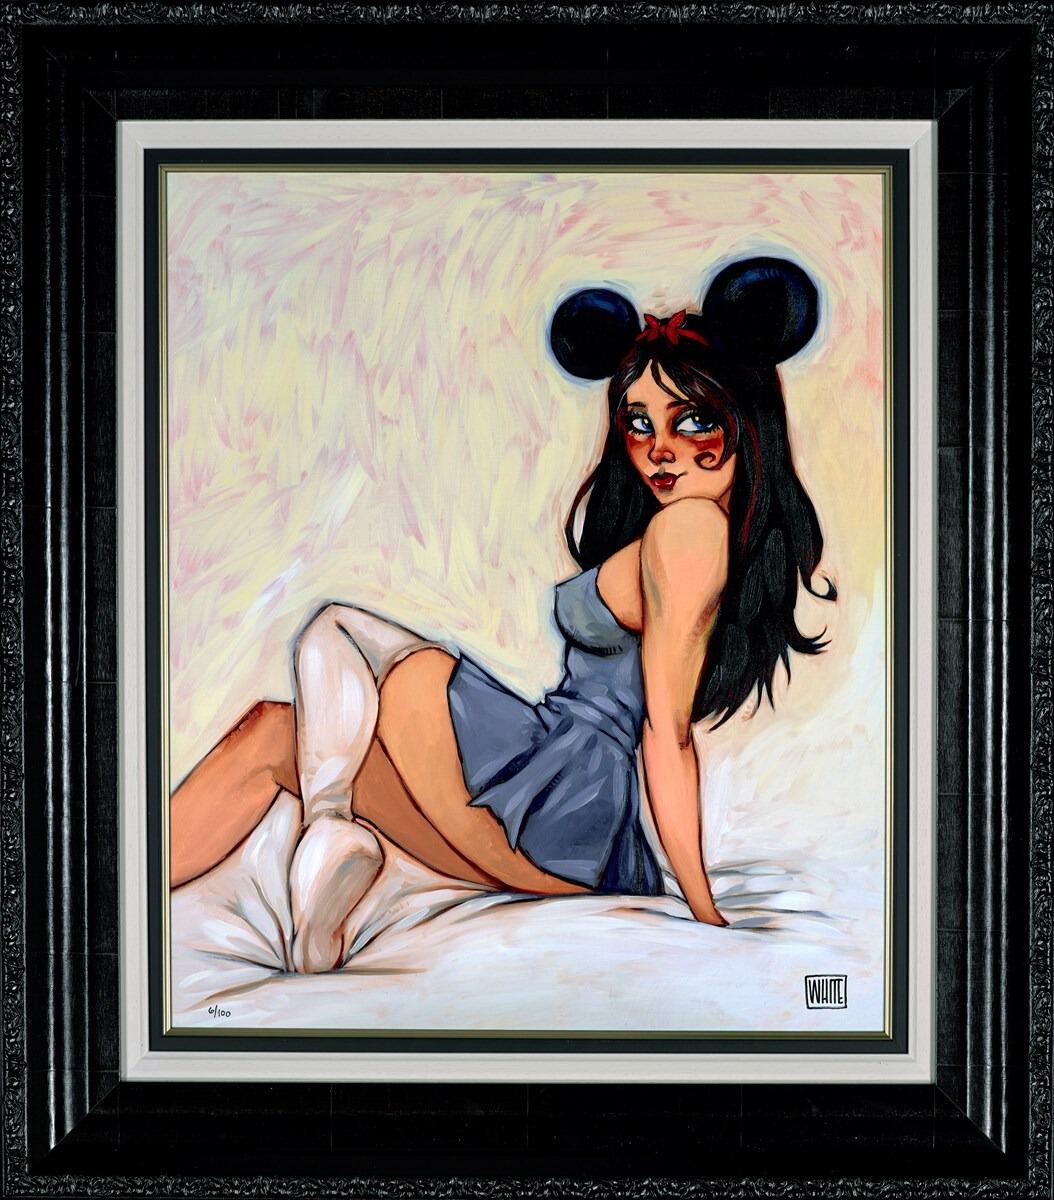 My Mouseketeer by Todd White - canvas art print LWHT158